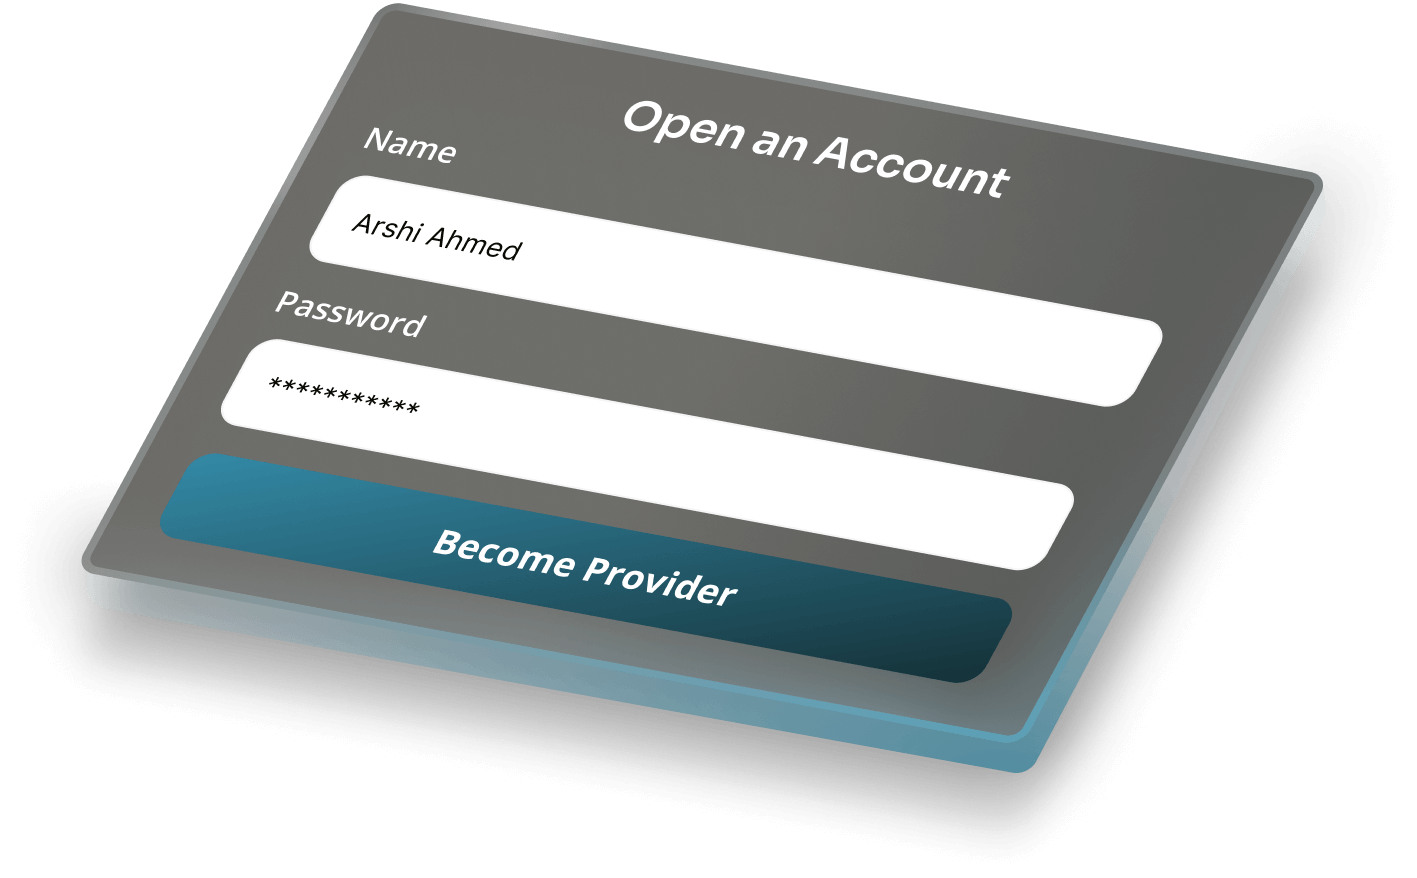 Use your existing account or open a new one